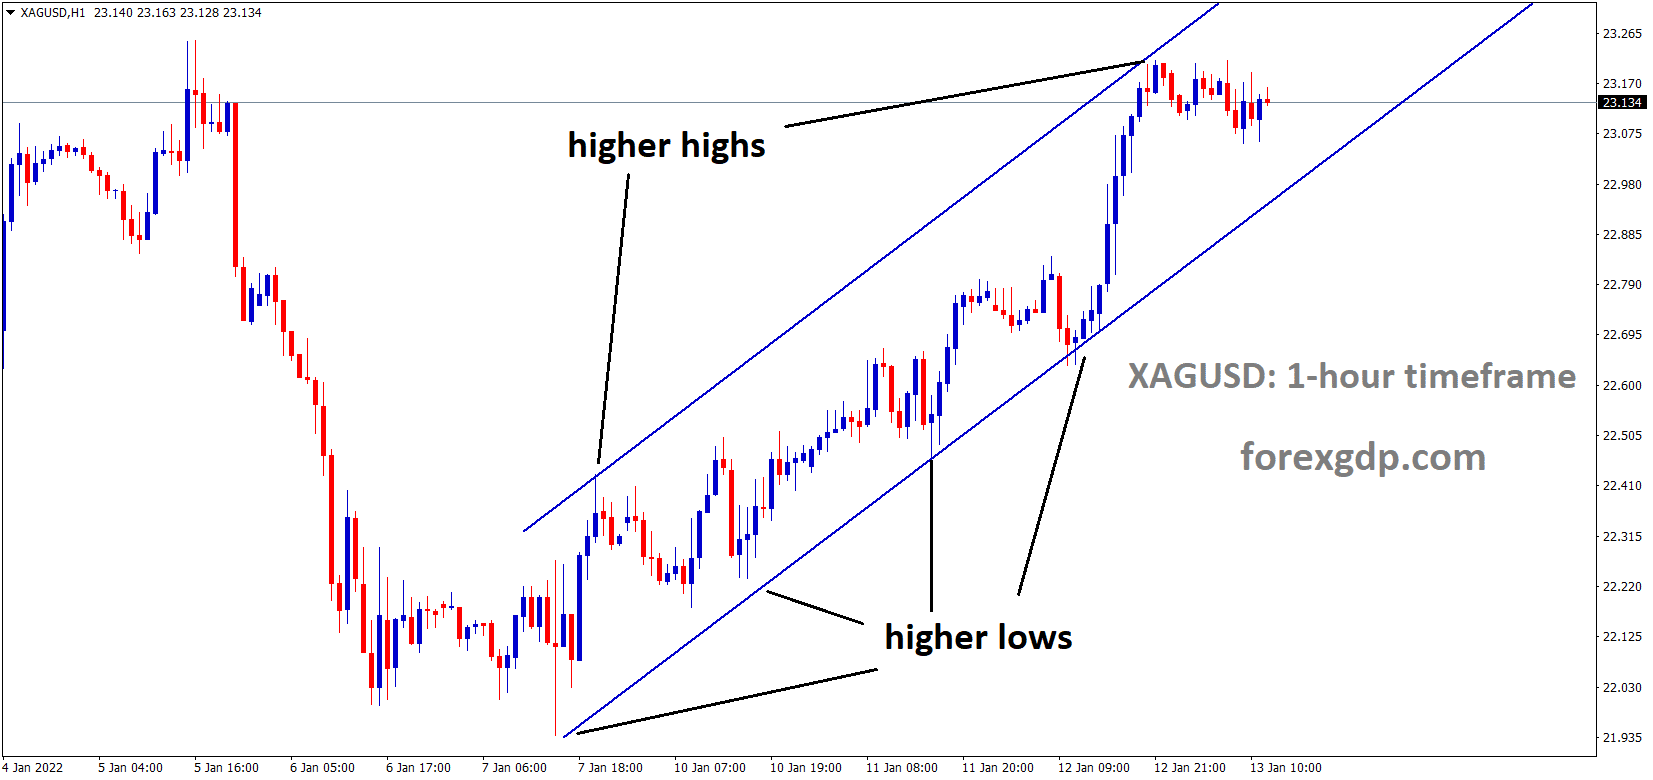 XAGUSD Silver Price is moving in an Ascending channel and the market has fallen from the higher high area of the channel